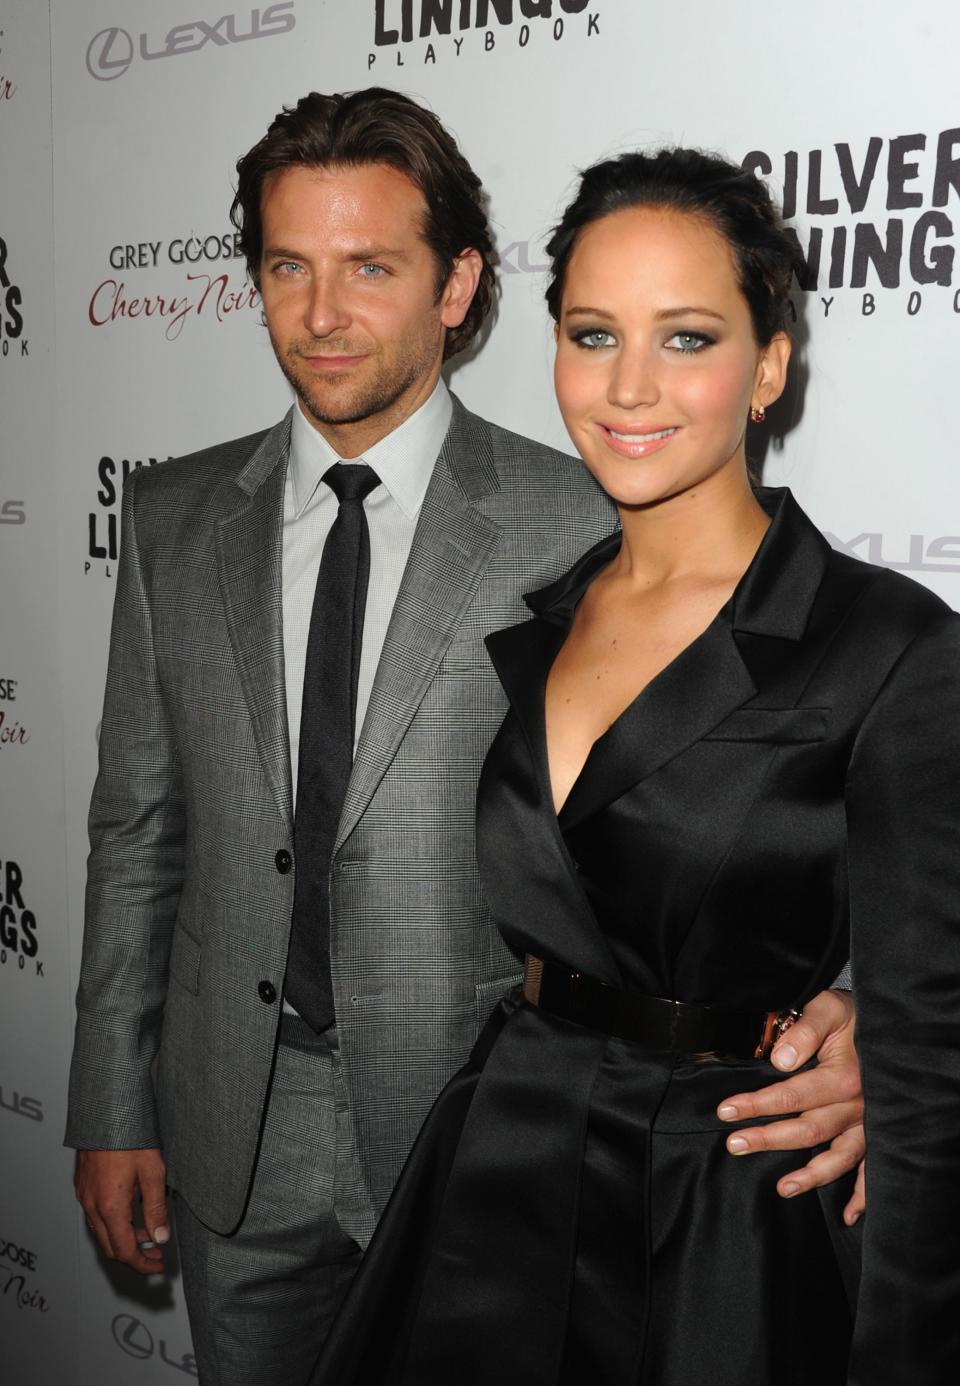 Screening Of The Weinstein Company's "Silver Linings Playbook" - Red Carpet